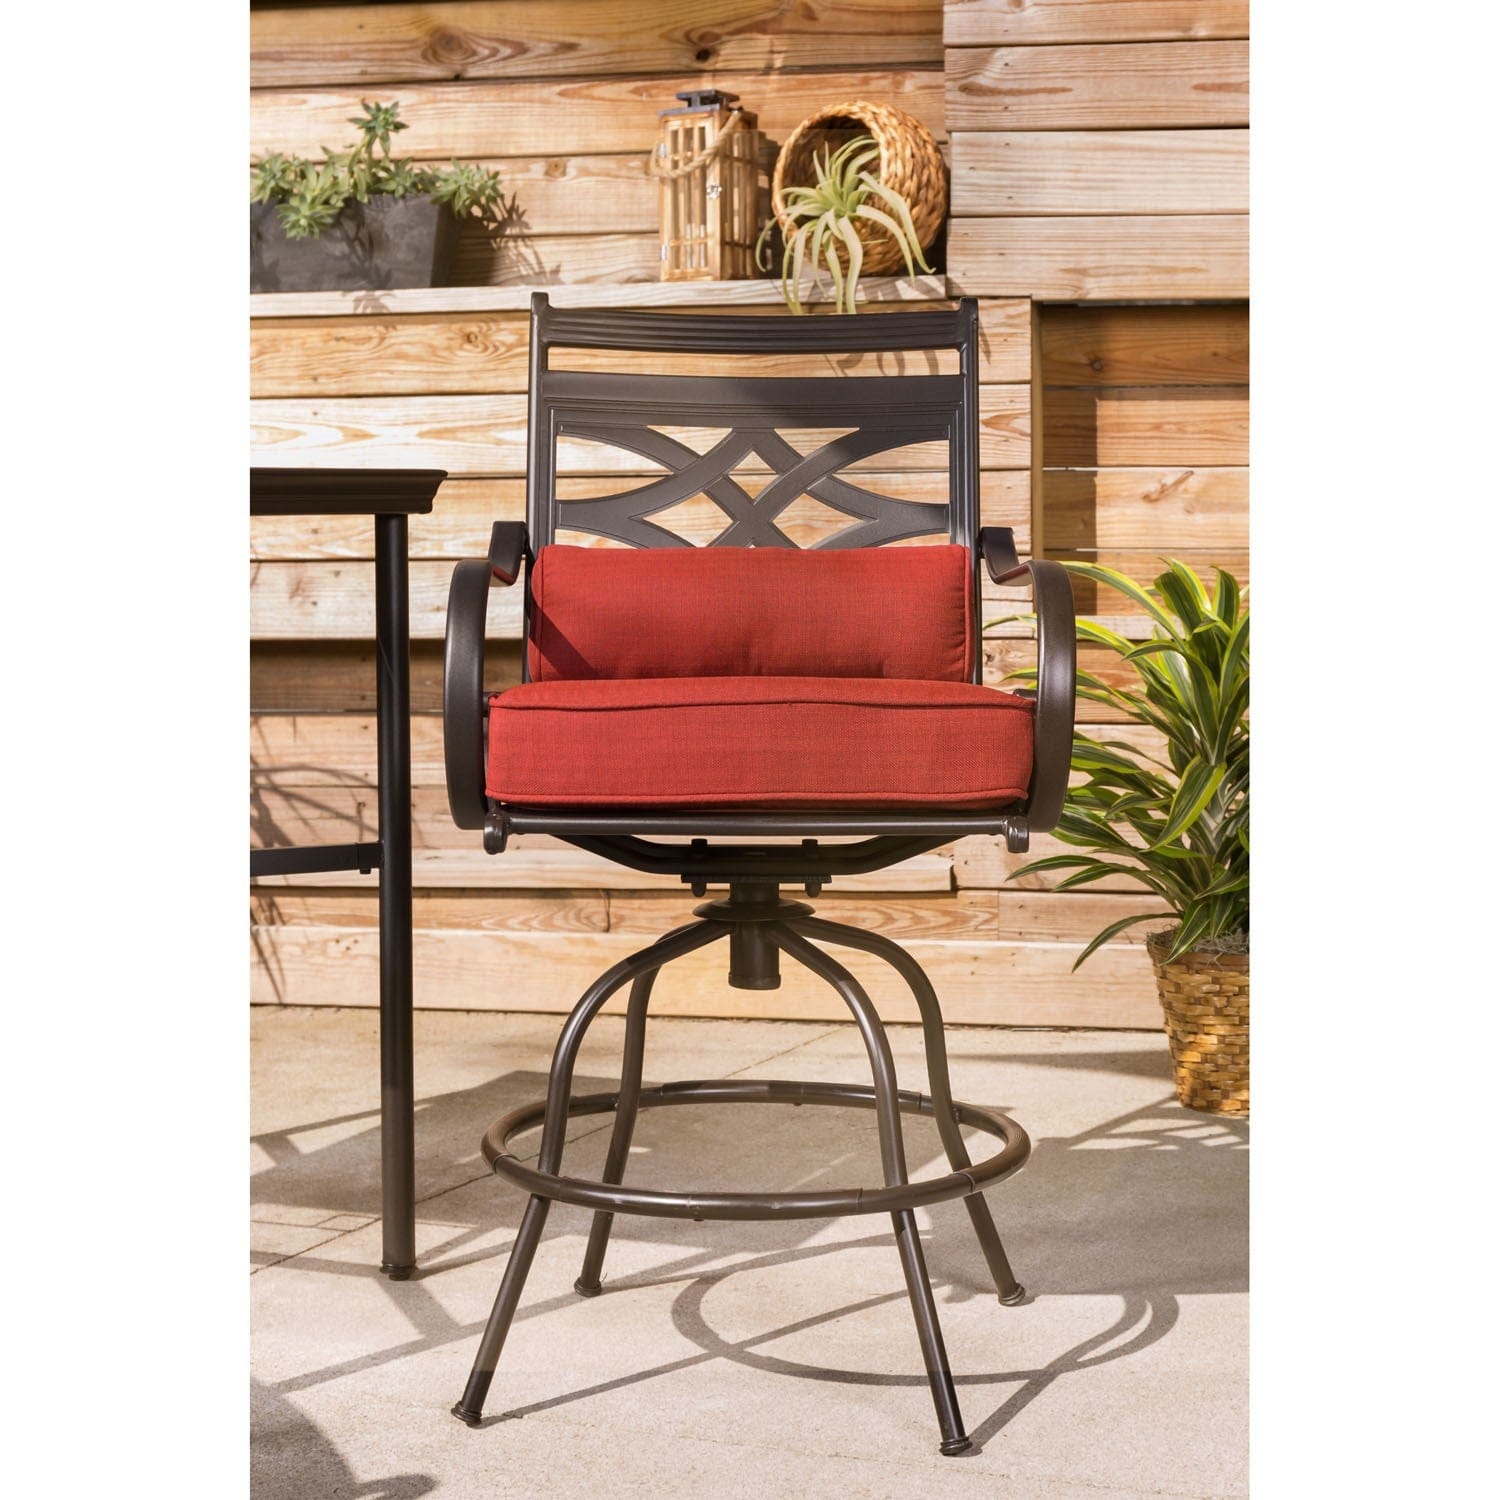 Hanover Outdoor Dining Set Hanover Montclair 3-Piece High-Dining Set in Chili Red with 2 Swivel Chairs and a 33-Inch Square Table | MCLRDN3PCBRSW2-CHL